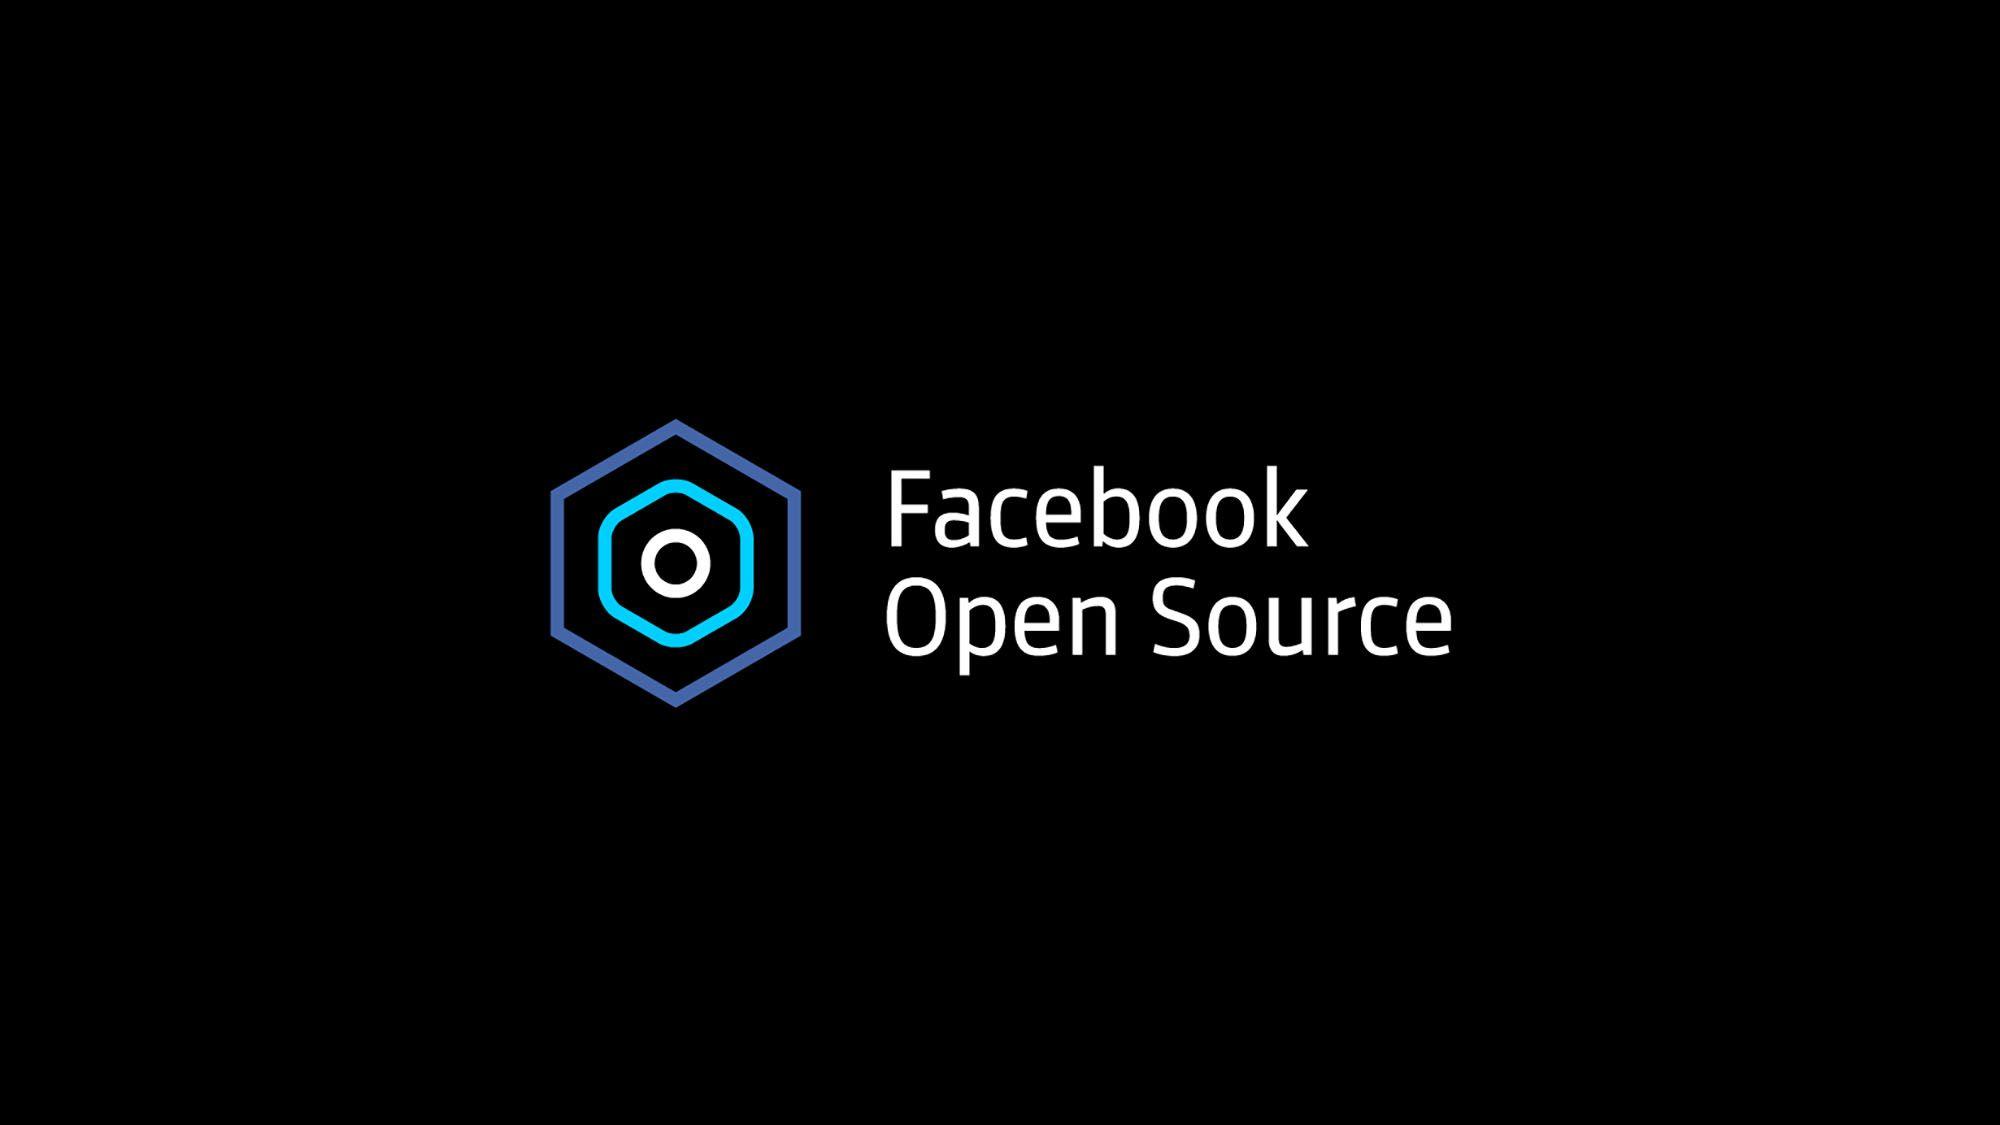 F8 Logo - F8 open source at Facebook's 2019 F8 conference - Facebook Code